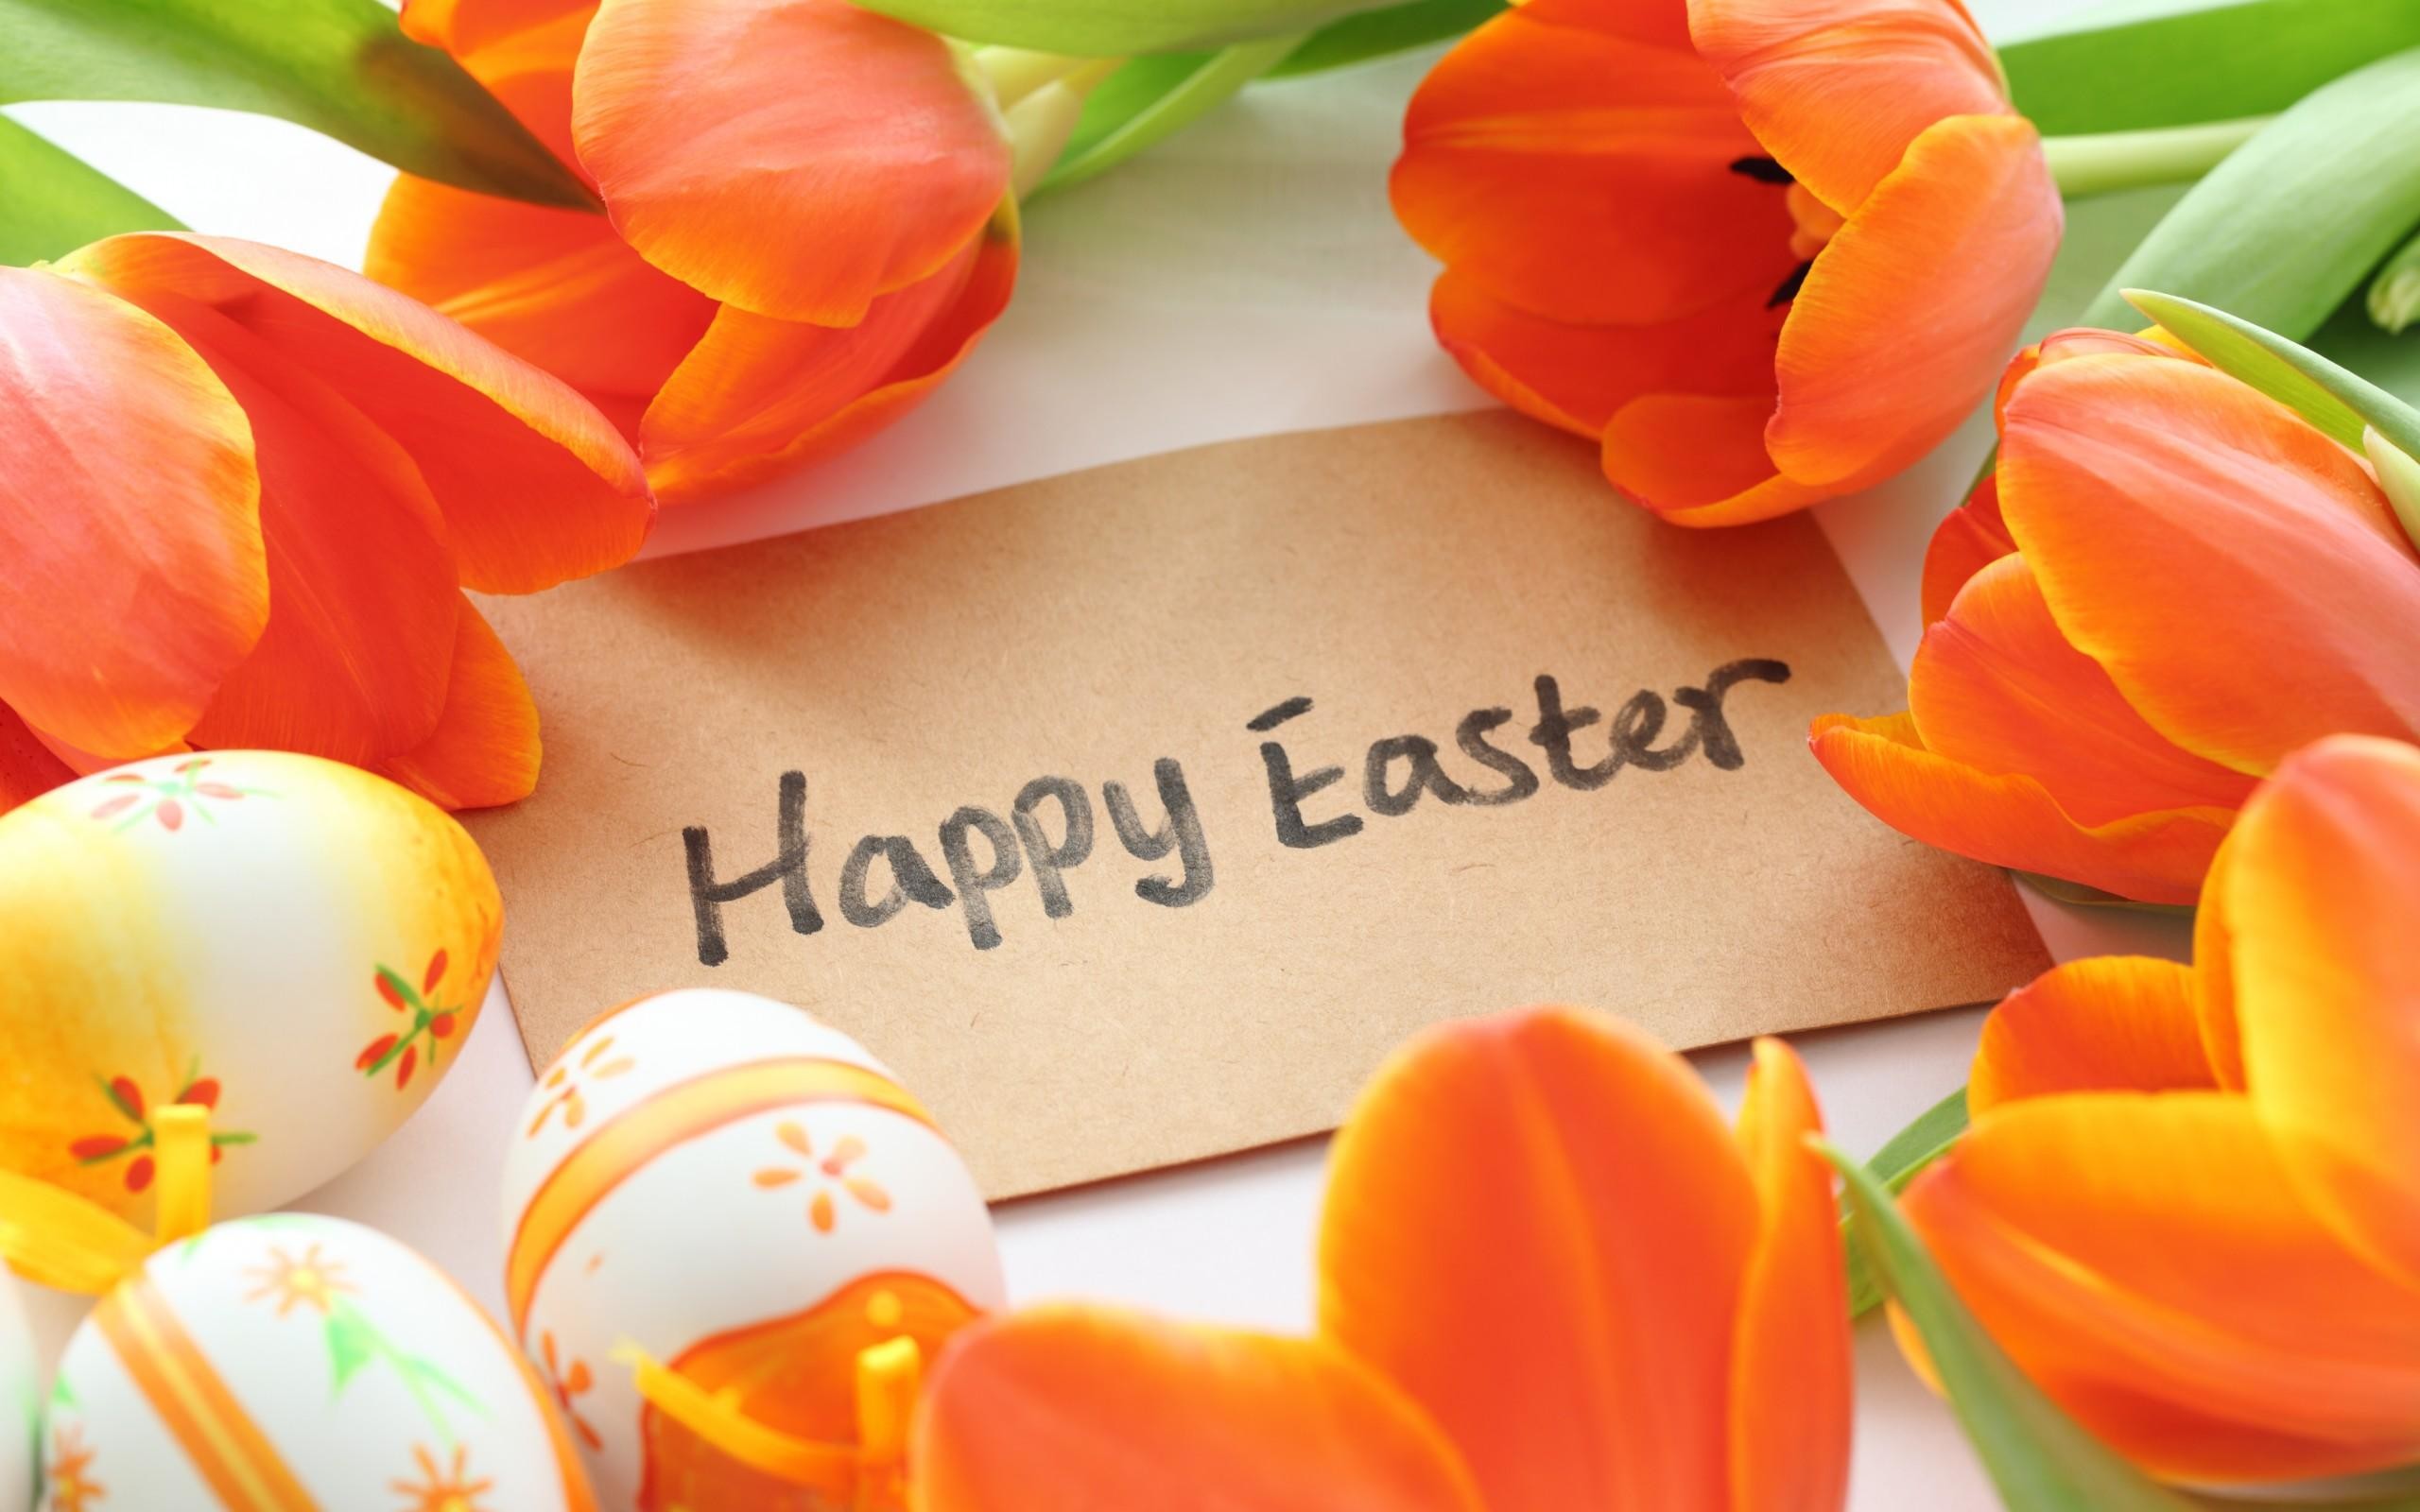 Free download Happy Easter Backgrounds for Desktop 66 images [2560x1600